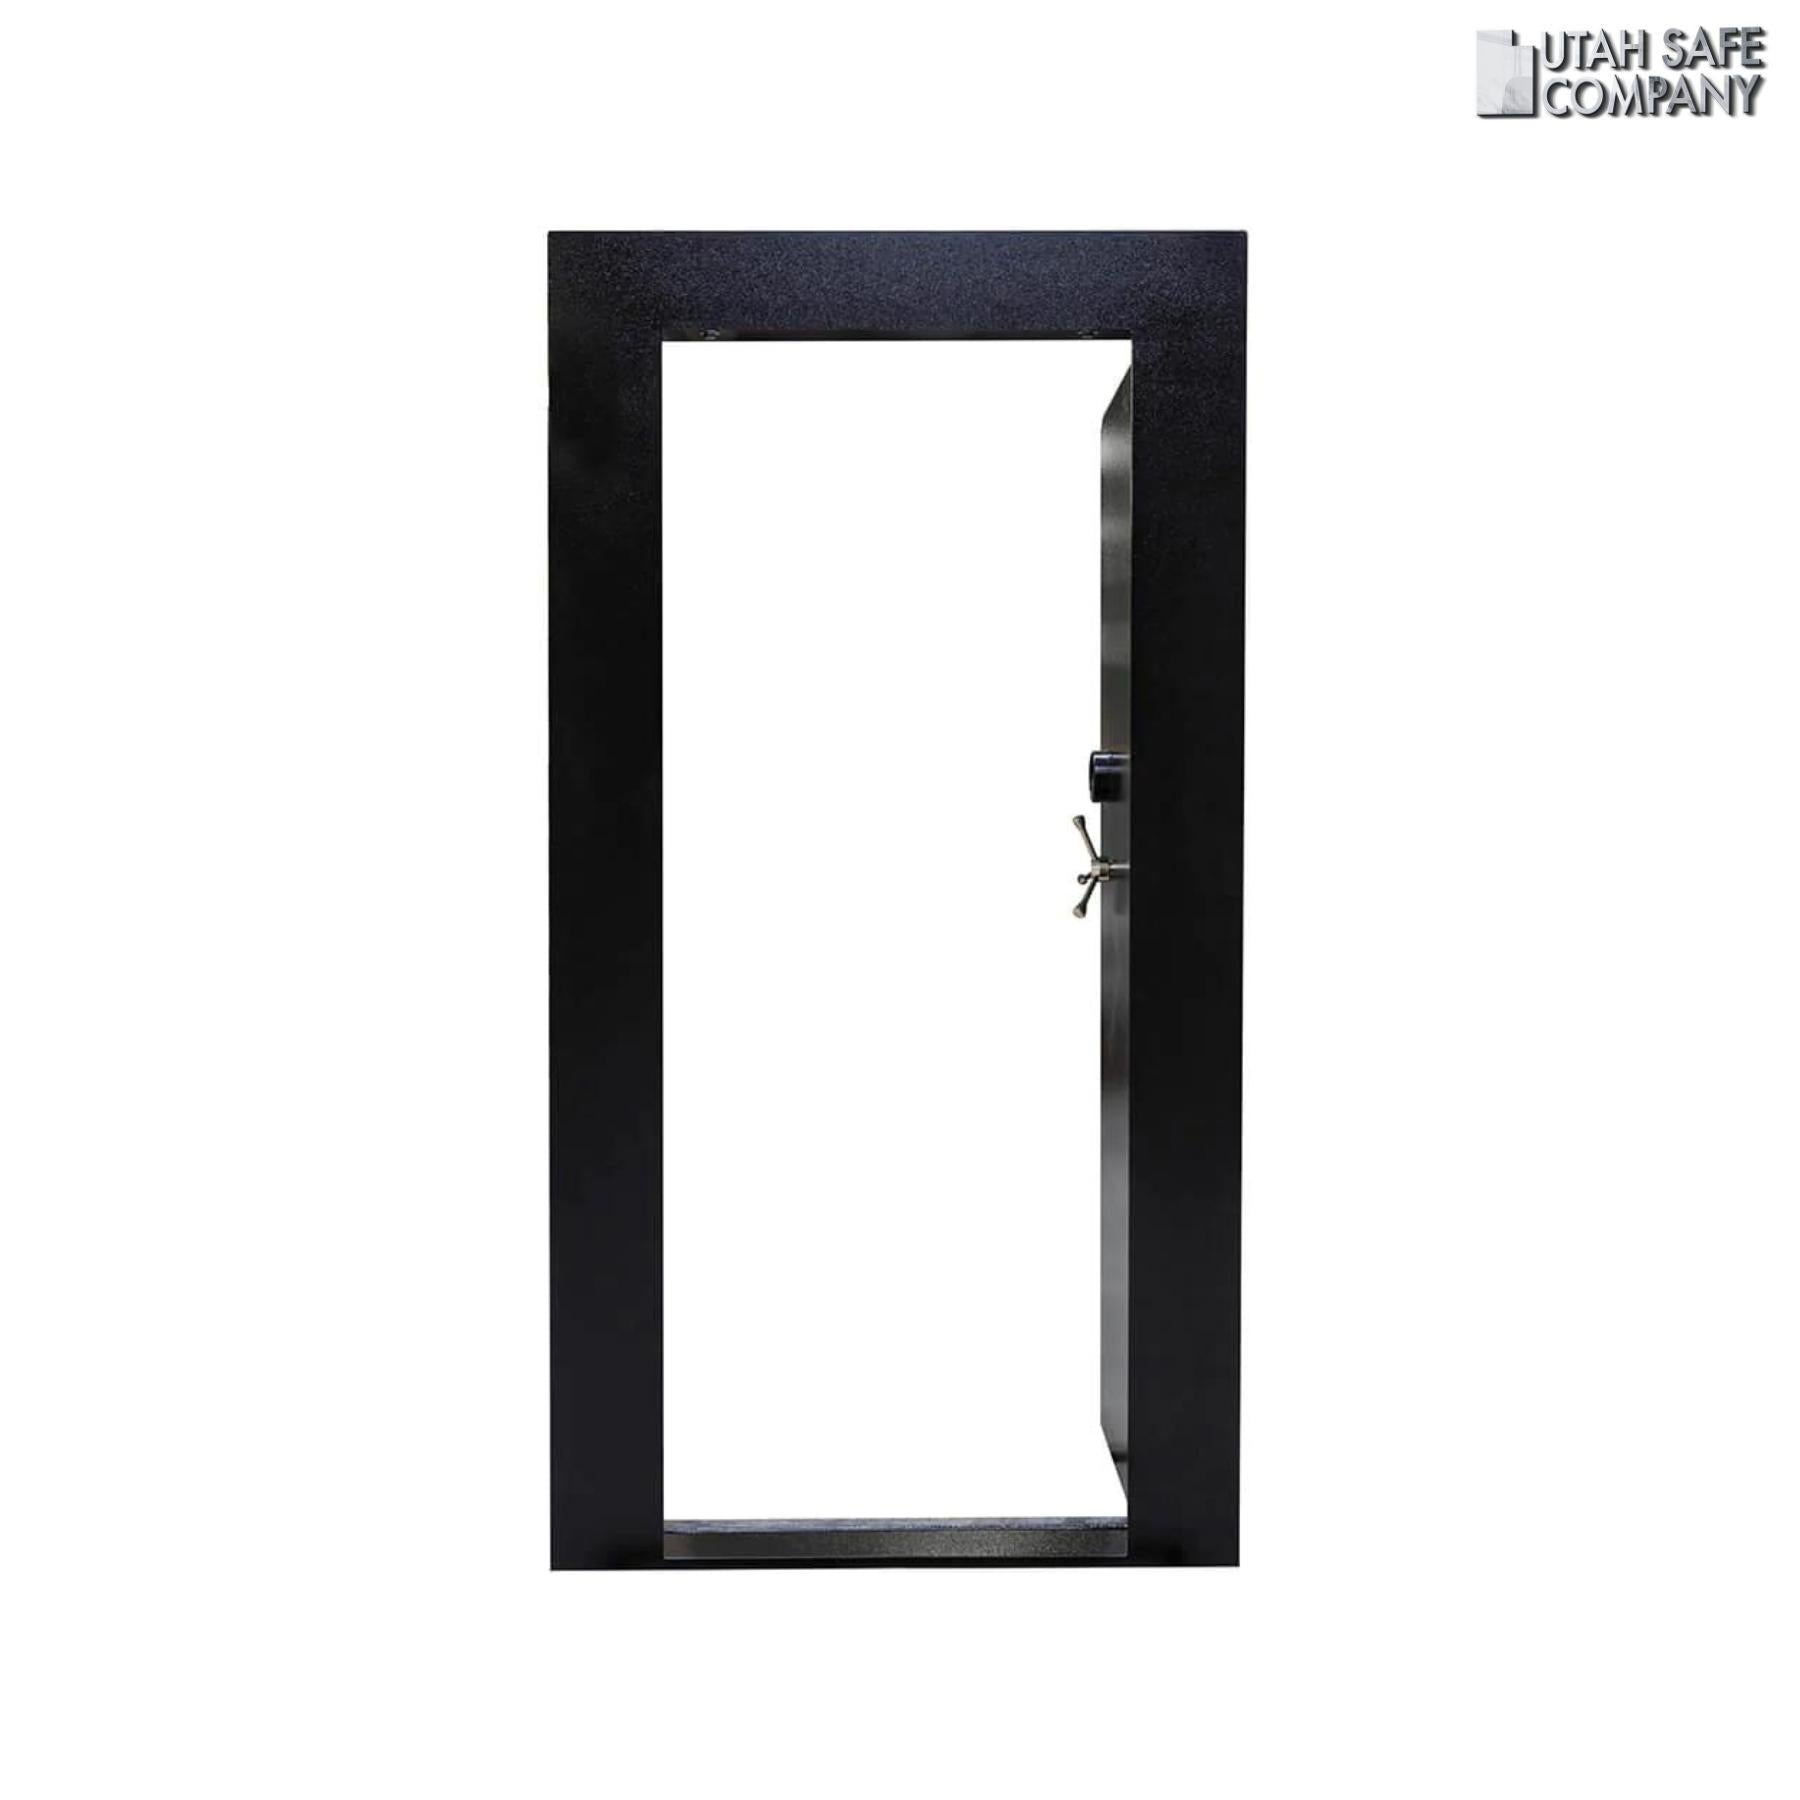 Liberty Out-Swing Premium Vault Door (Either Left or Right Hinge)